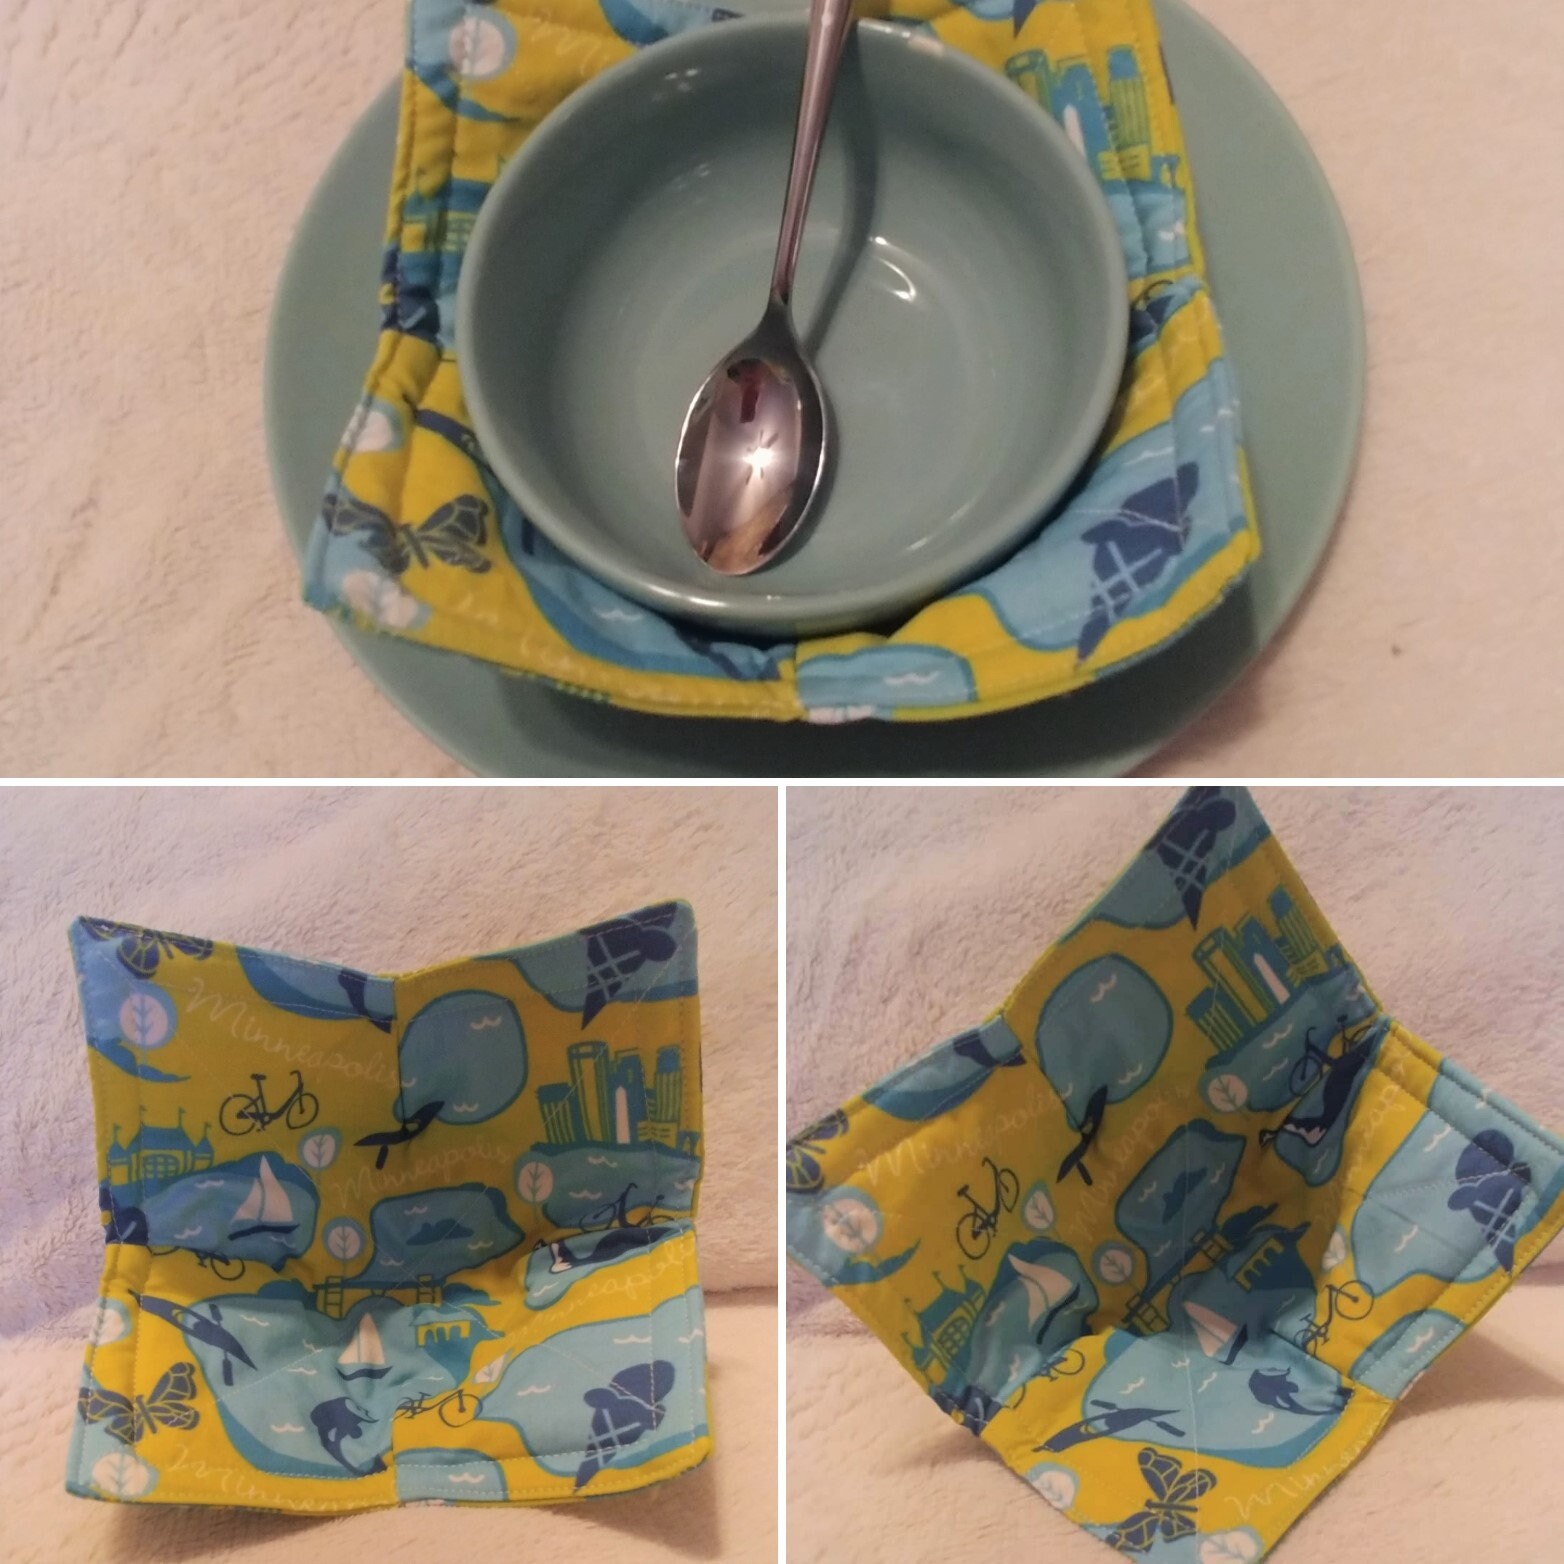 Quilted Bowl Cozy for microwave or ice cream 10 x 10 Green/Orange Floral  - Handy Caddy & Irresistible Leggings